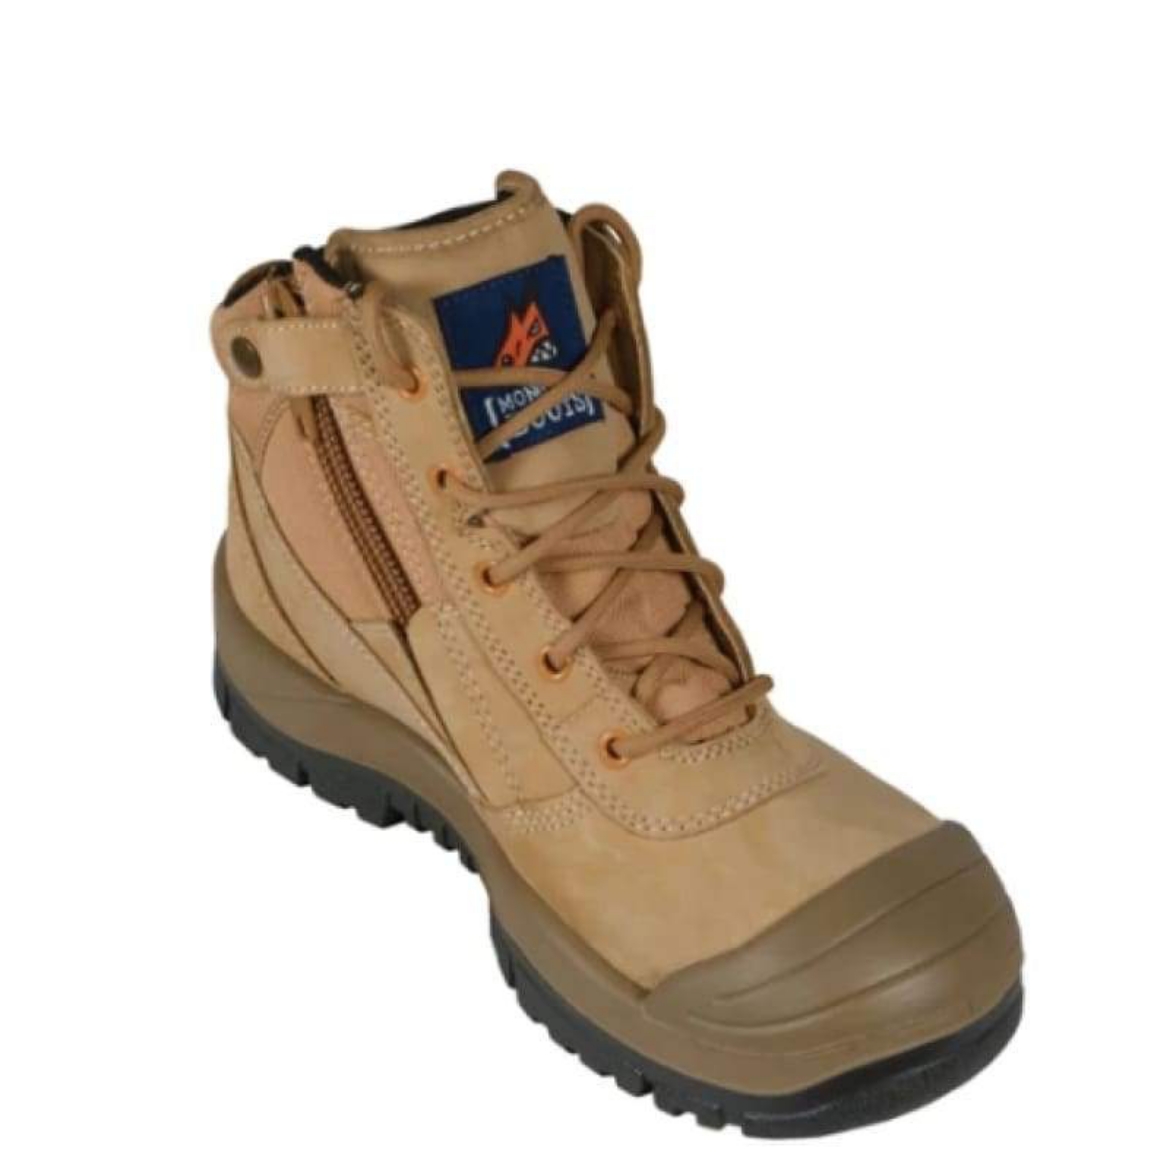 Picture of Mongrel Boots, Safety Boot, Zipsider, Scuff Cap